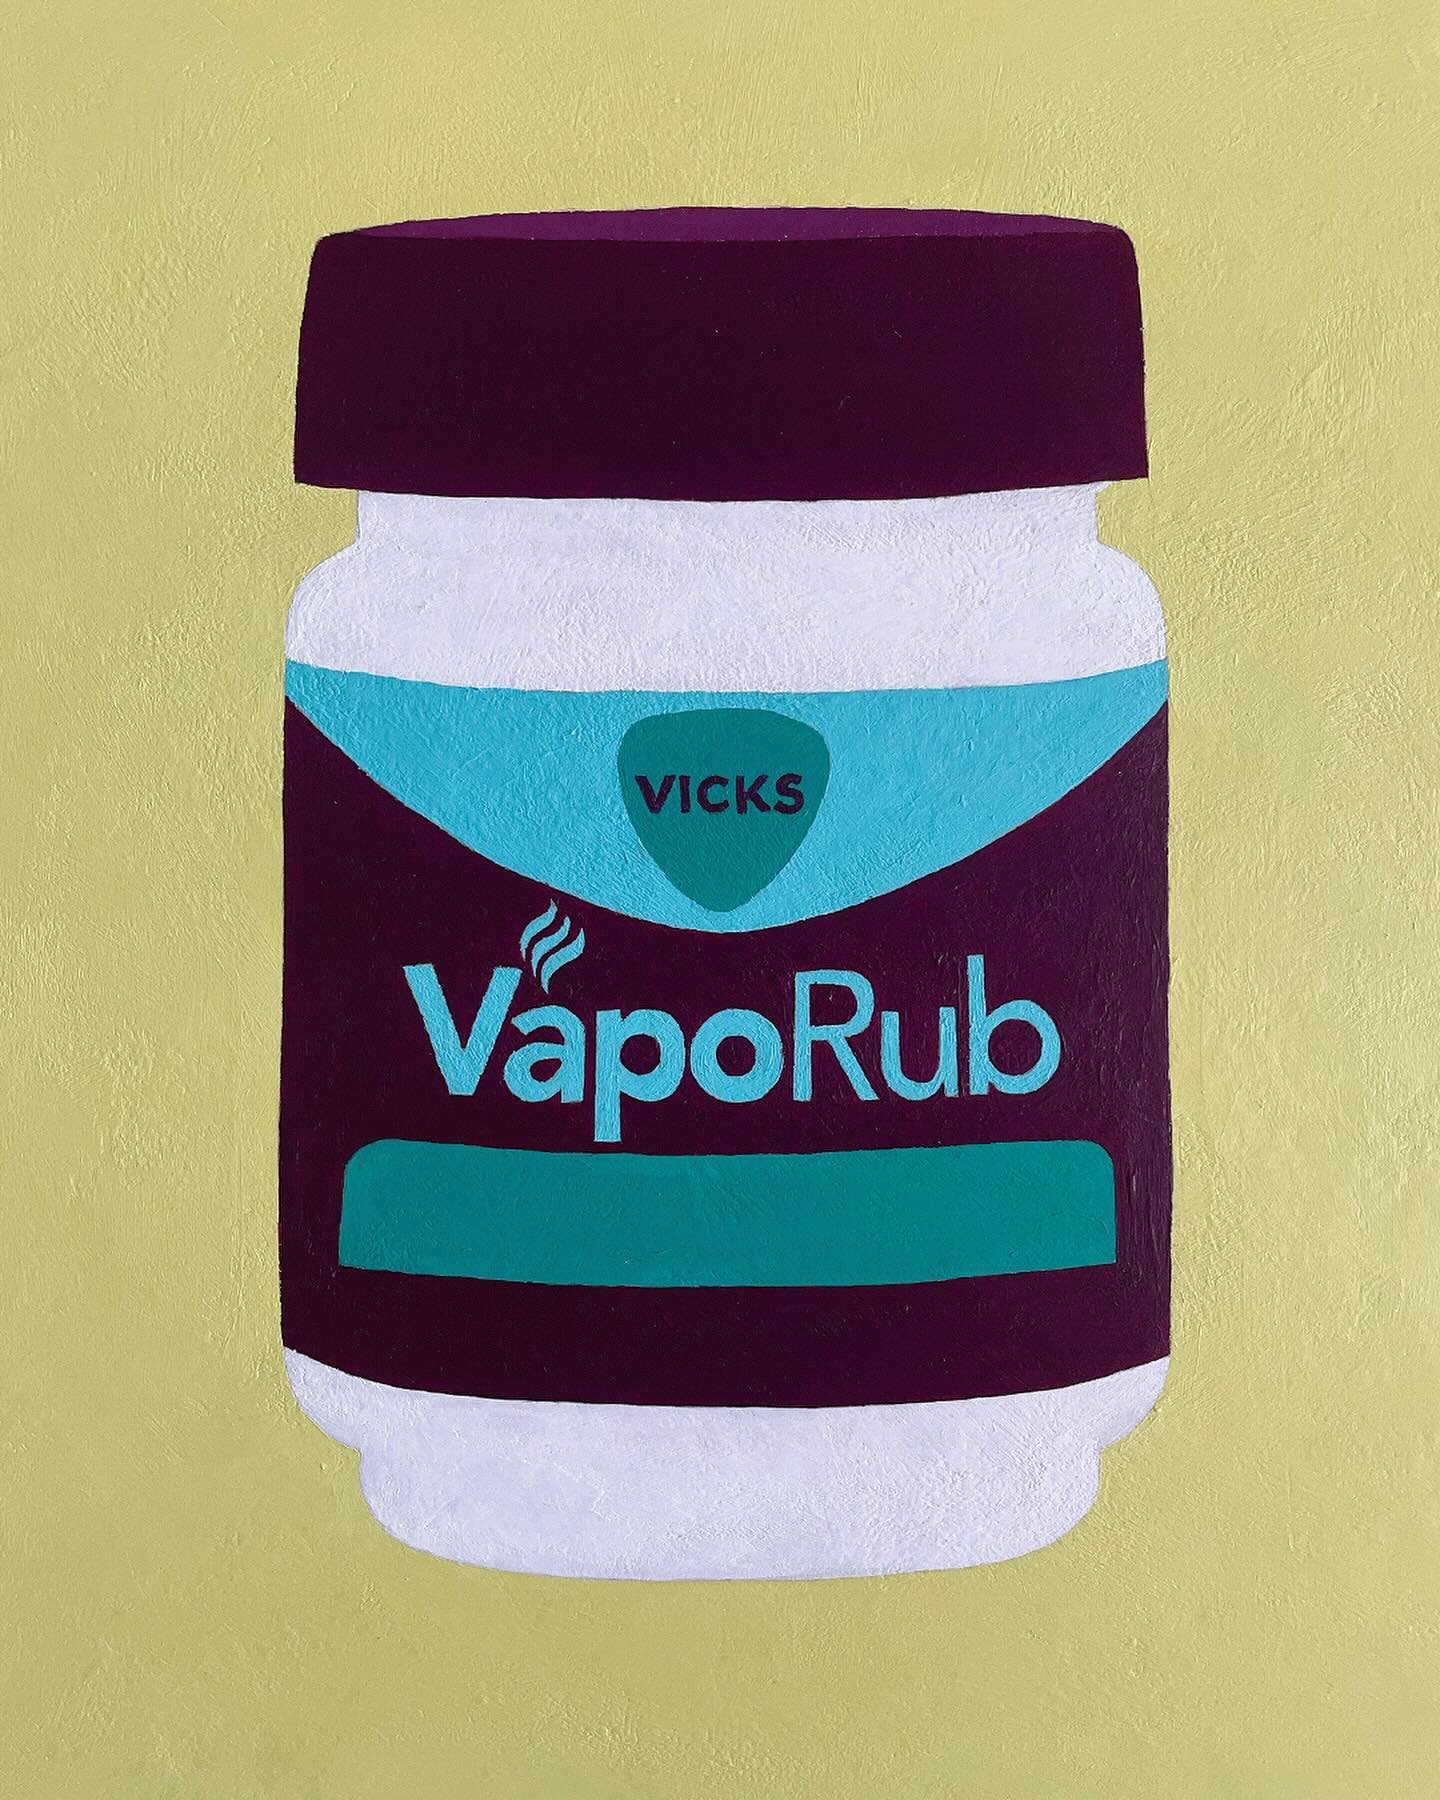 When art meets comfort! This is my vibrant take on the iconic Vicks Vapor Rub container. Which color is your favorite? 

#msadrianareyes #artistsoninstagram #acrylicpainting #acrylicsoncanvas #canvaspainting #canvasart #pontevicks #vicksvaporub #acry